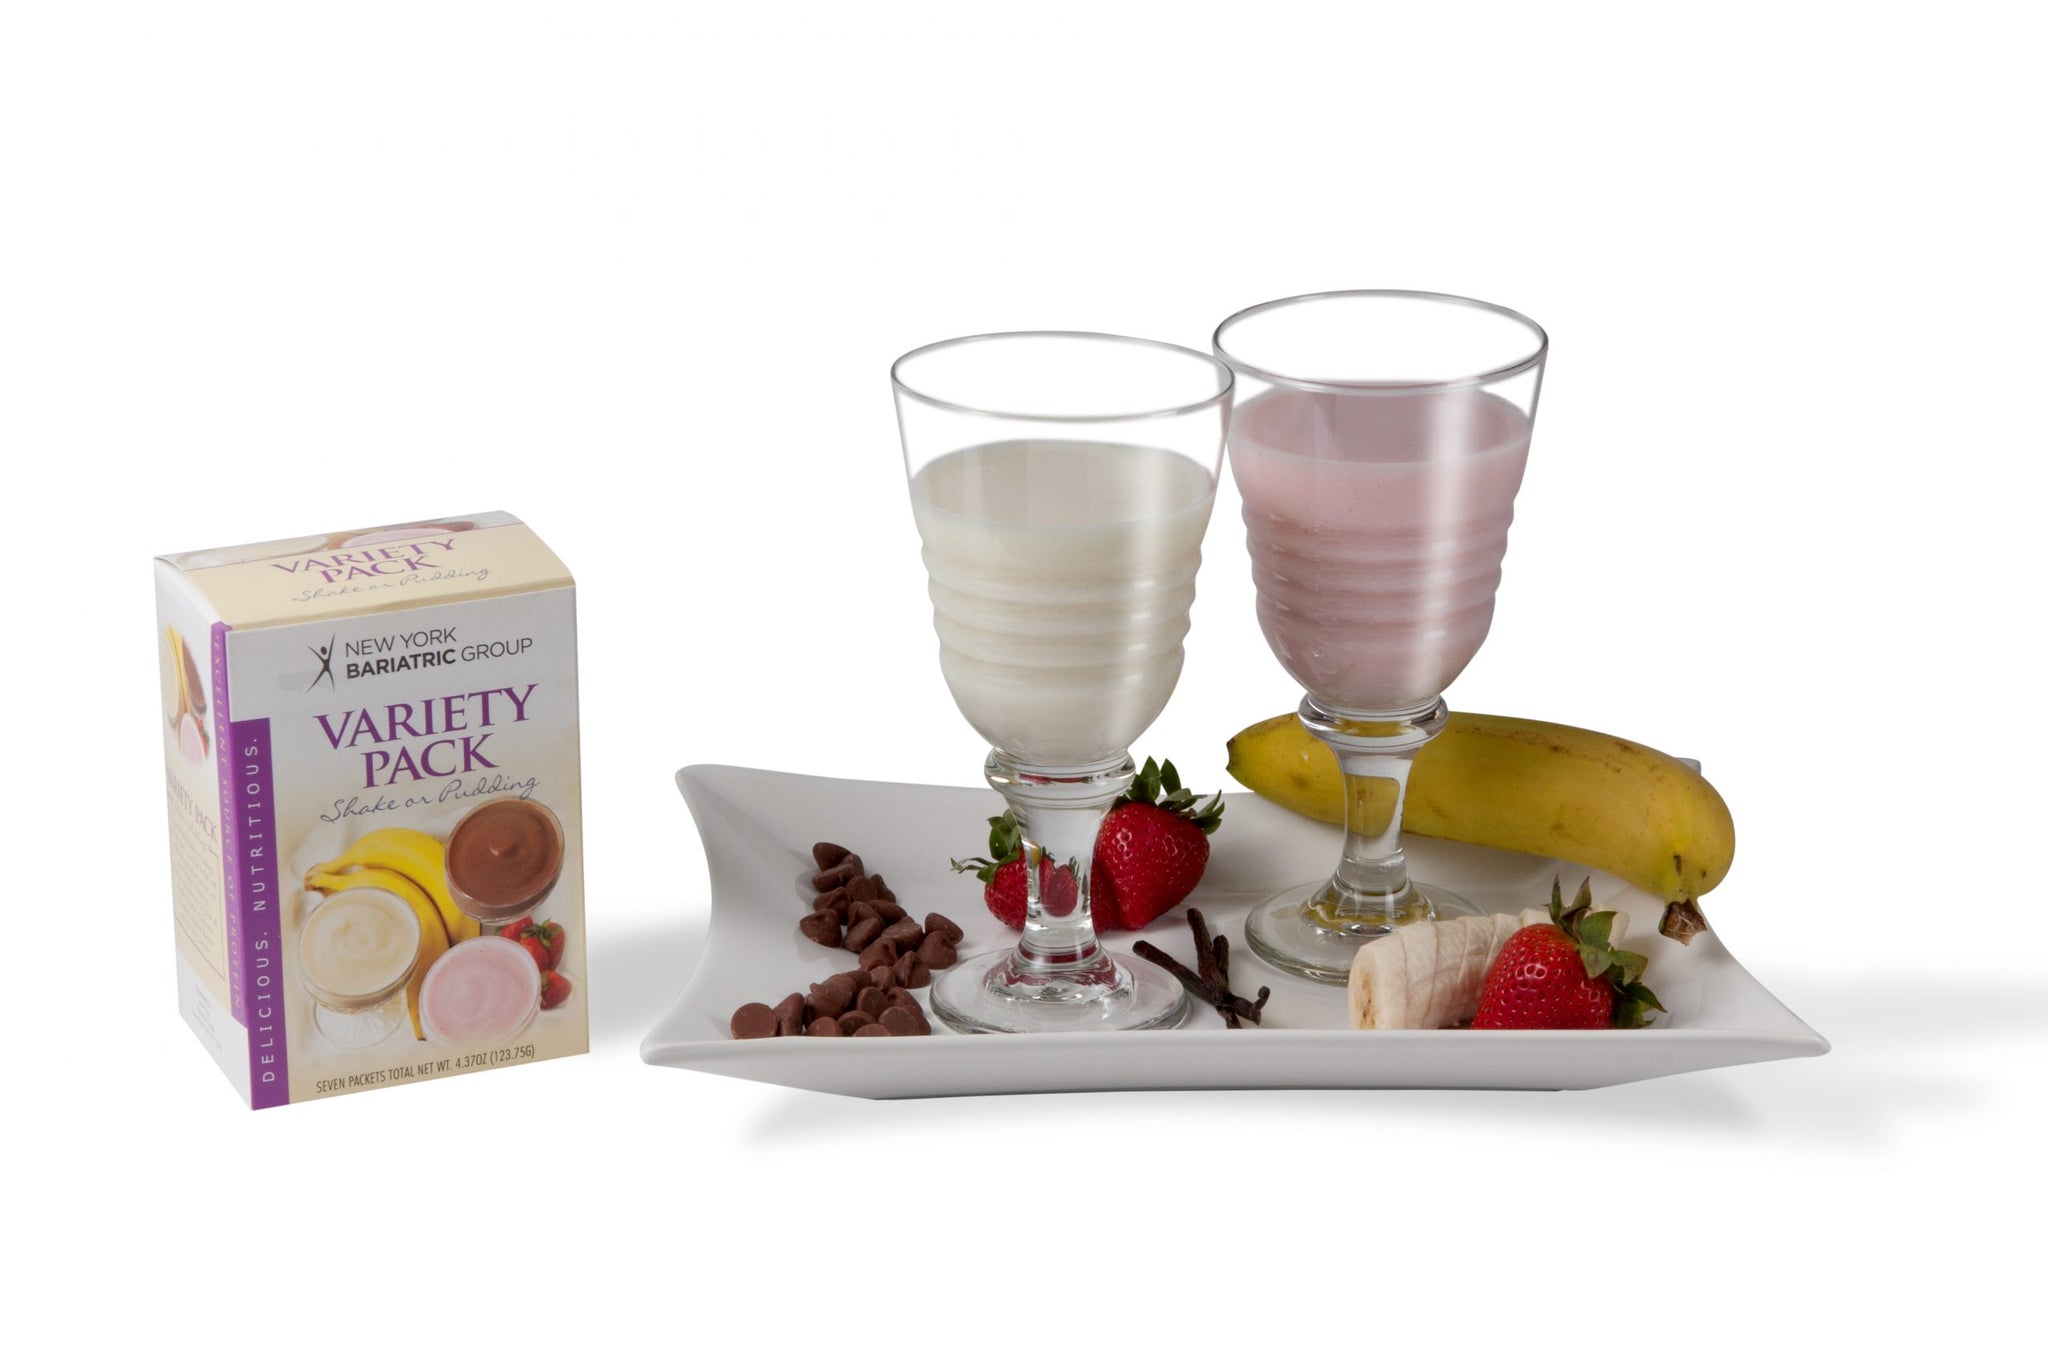 Variety Pack Protein Shakes & Bariatric Puddings